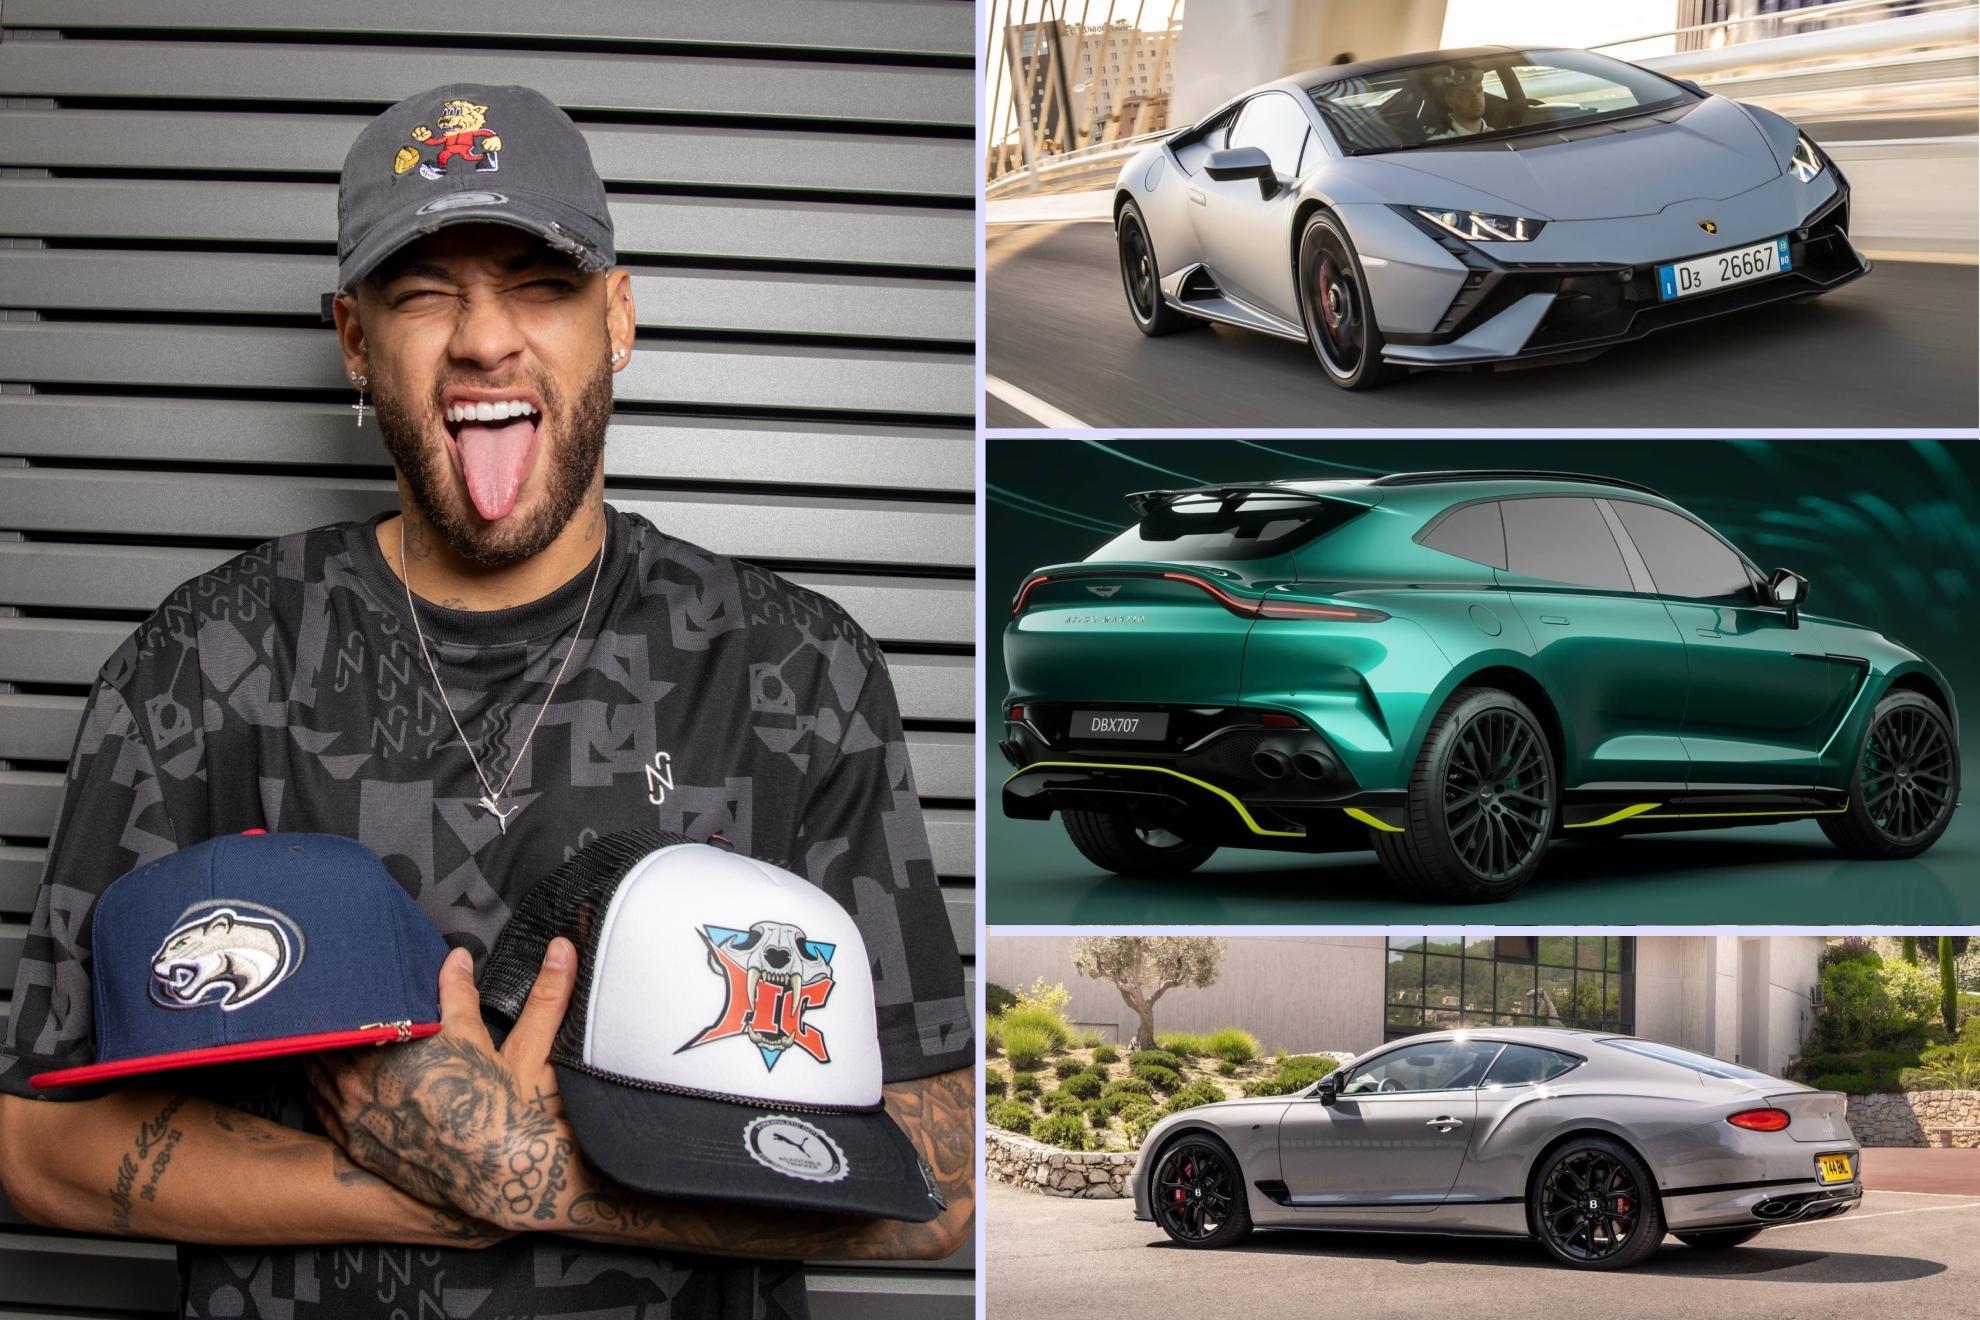 Neymar and his cars